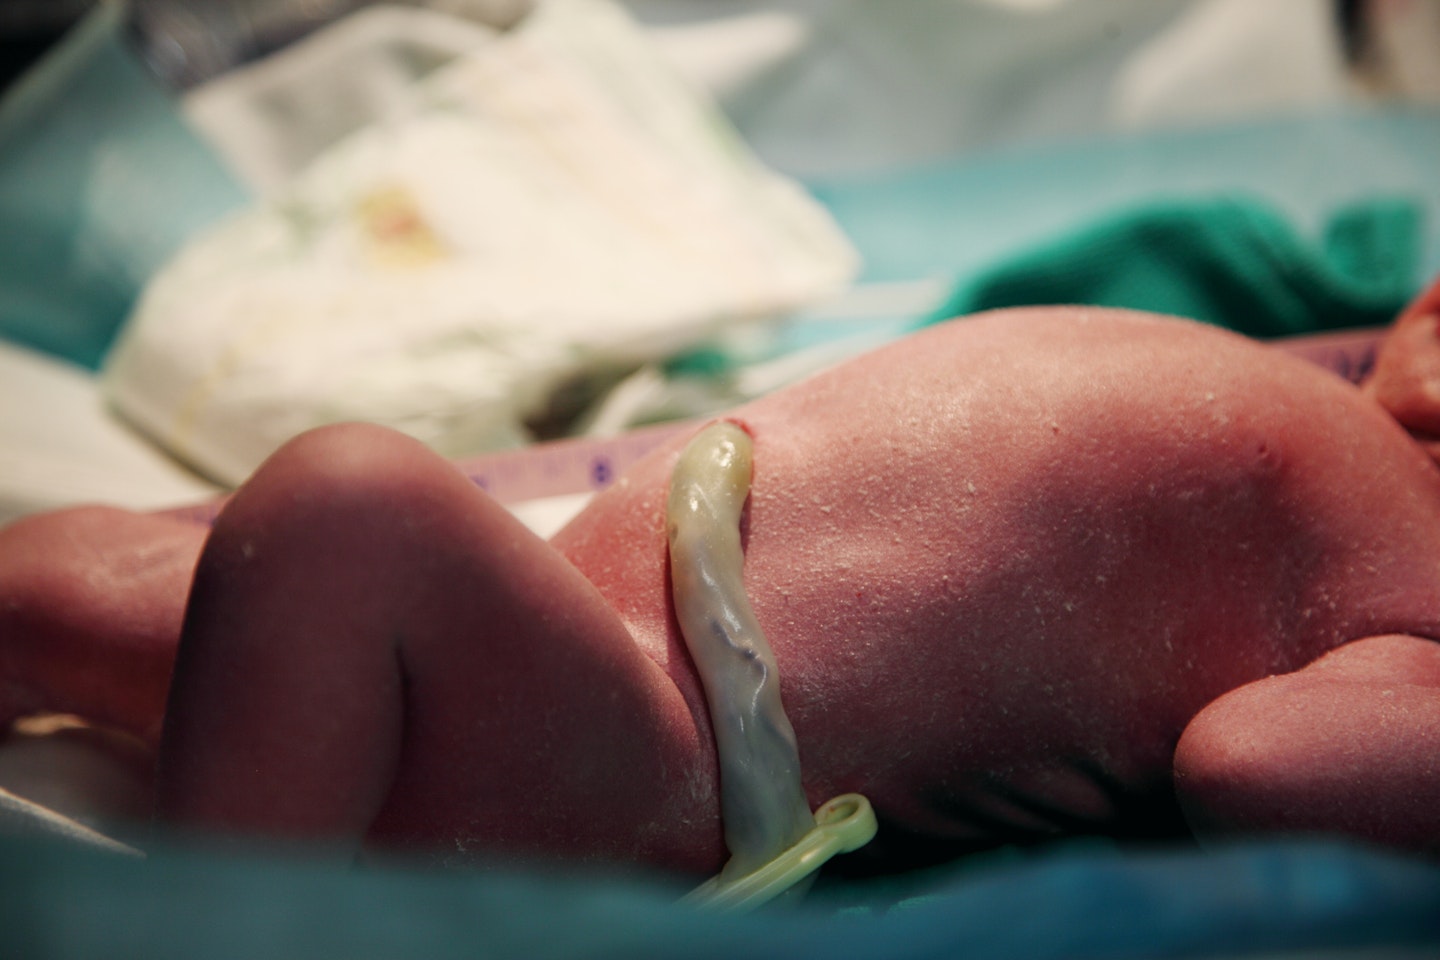 Umbilical cord cutting: everything you need to know